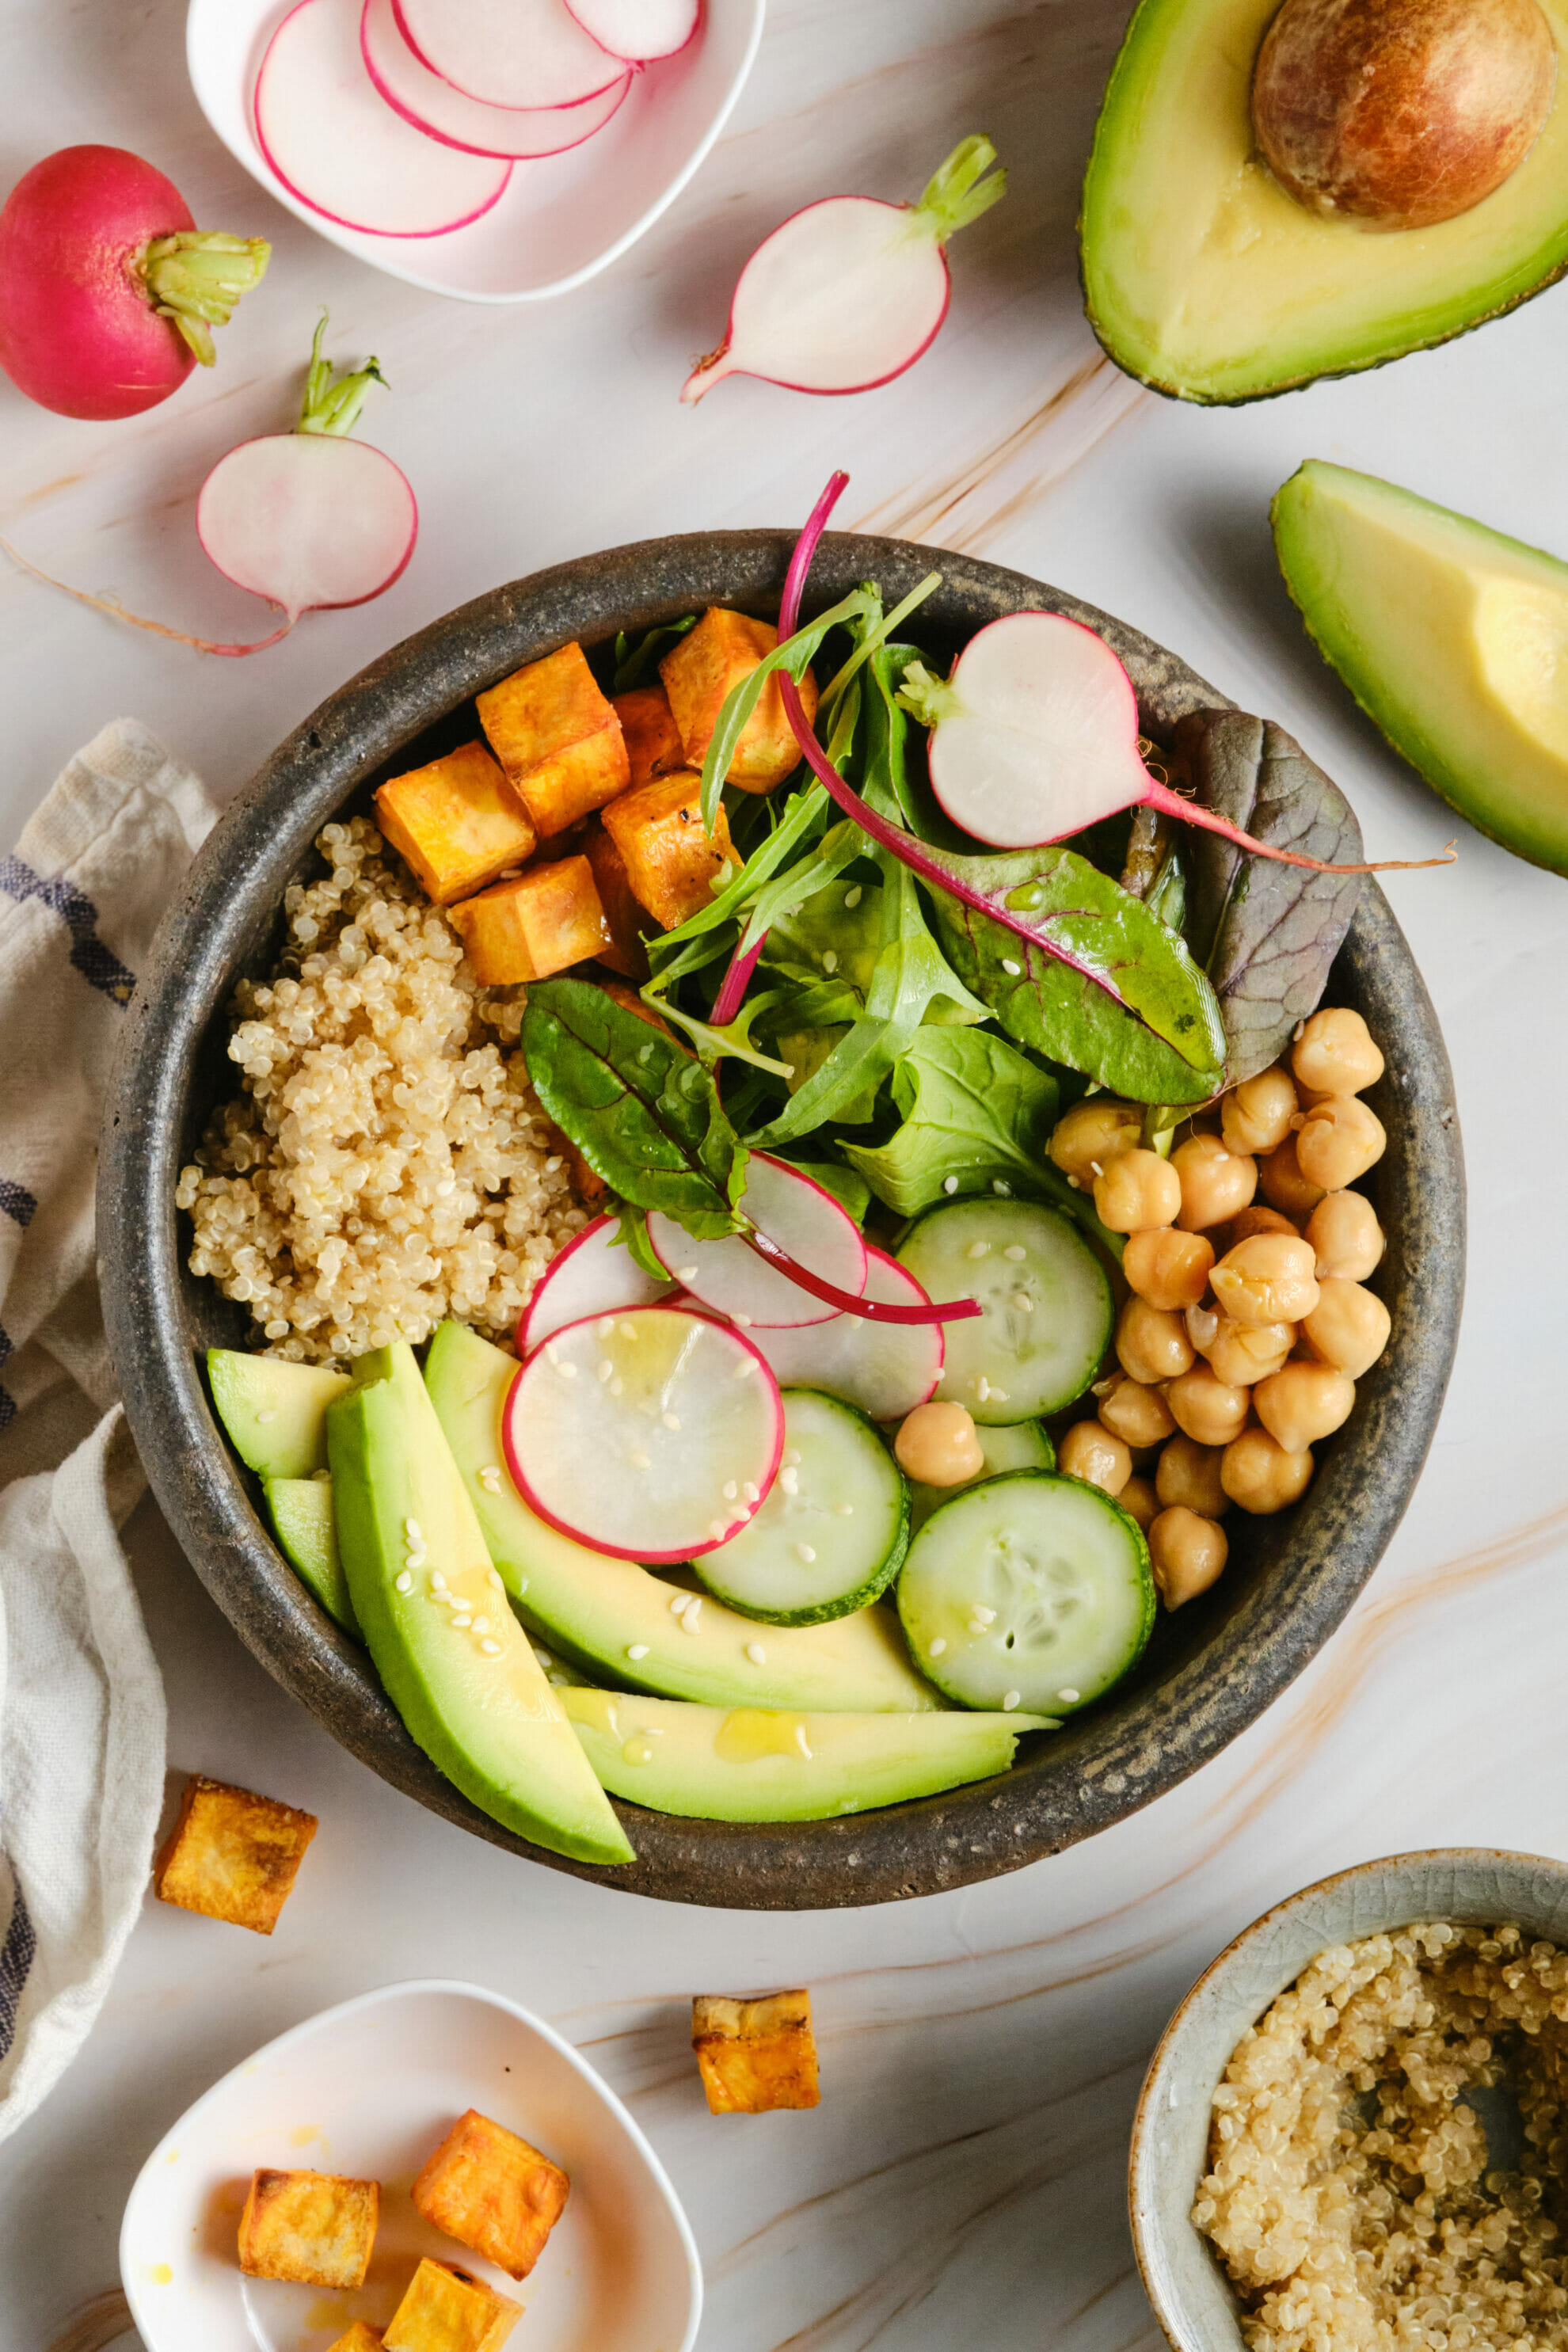 Healthy and Delicious Buddha Bowl Recipe featured